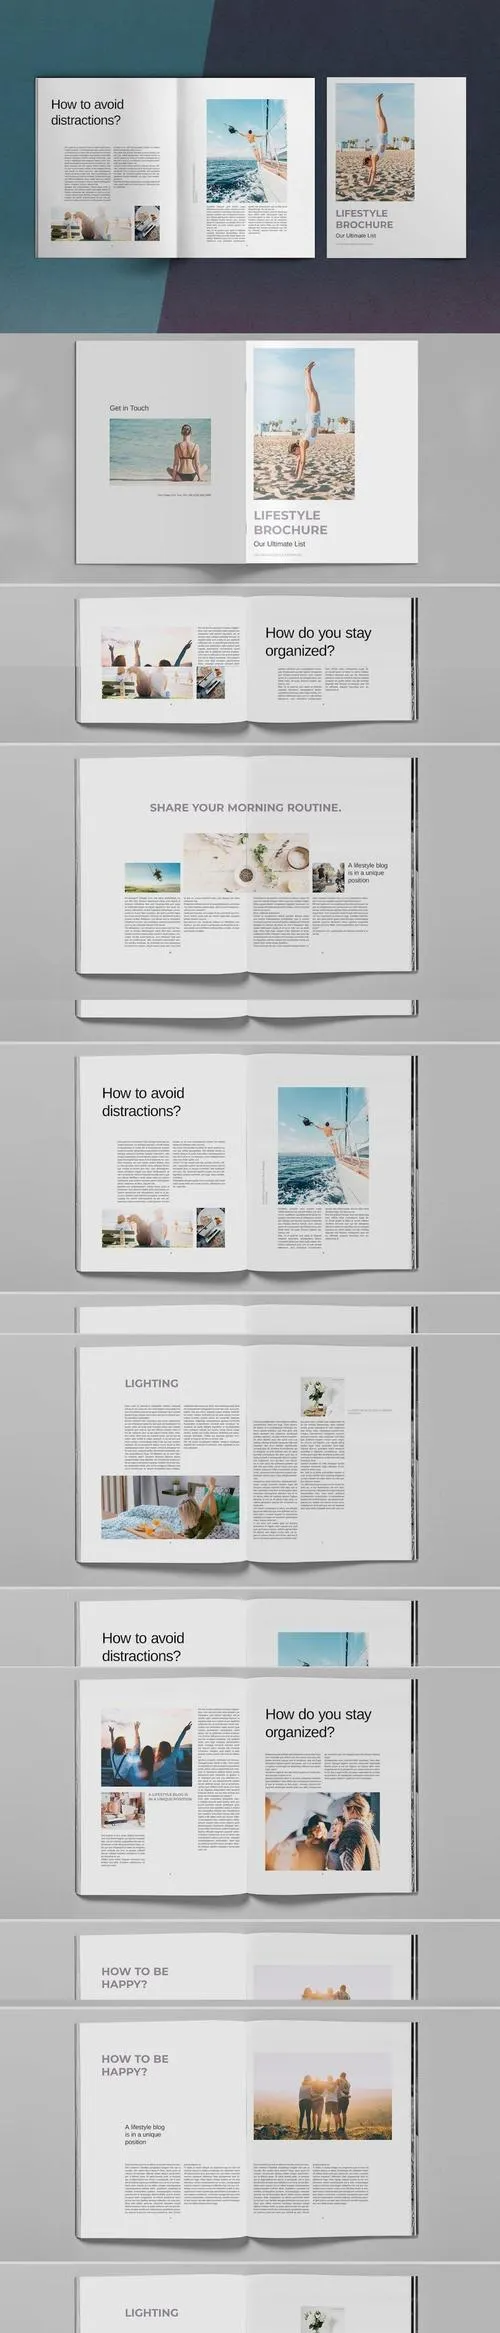 Lifestyle Brochure Layout Template